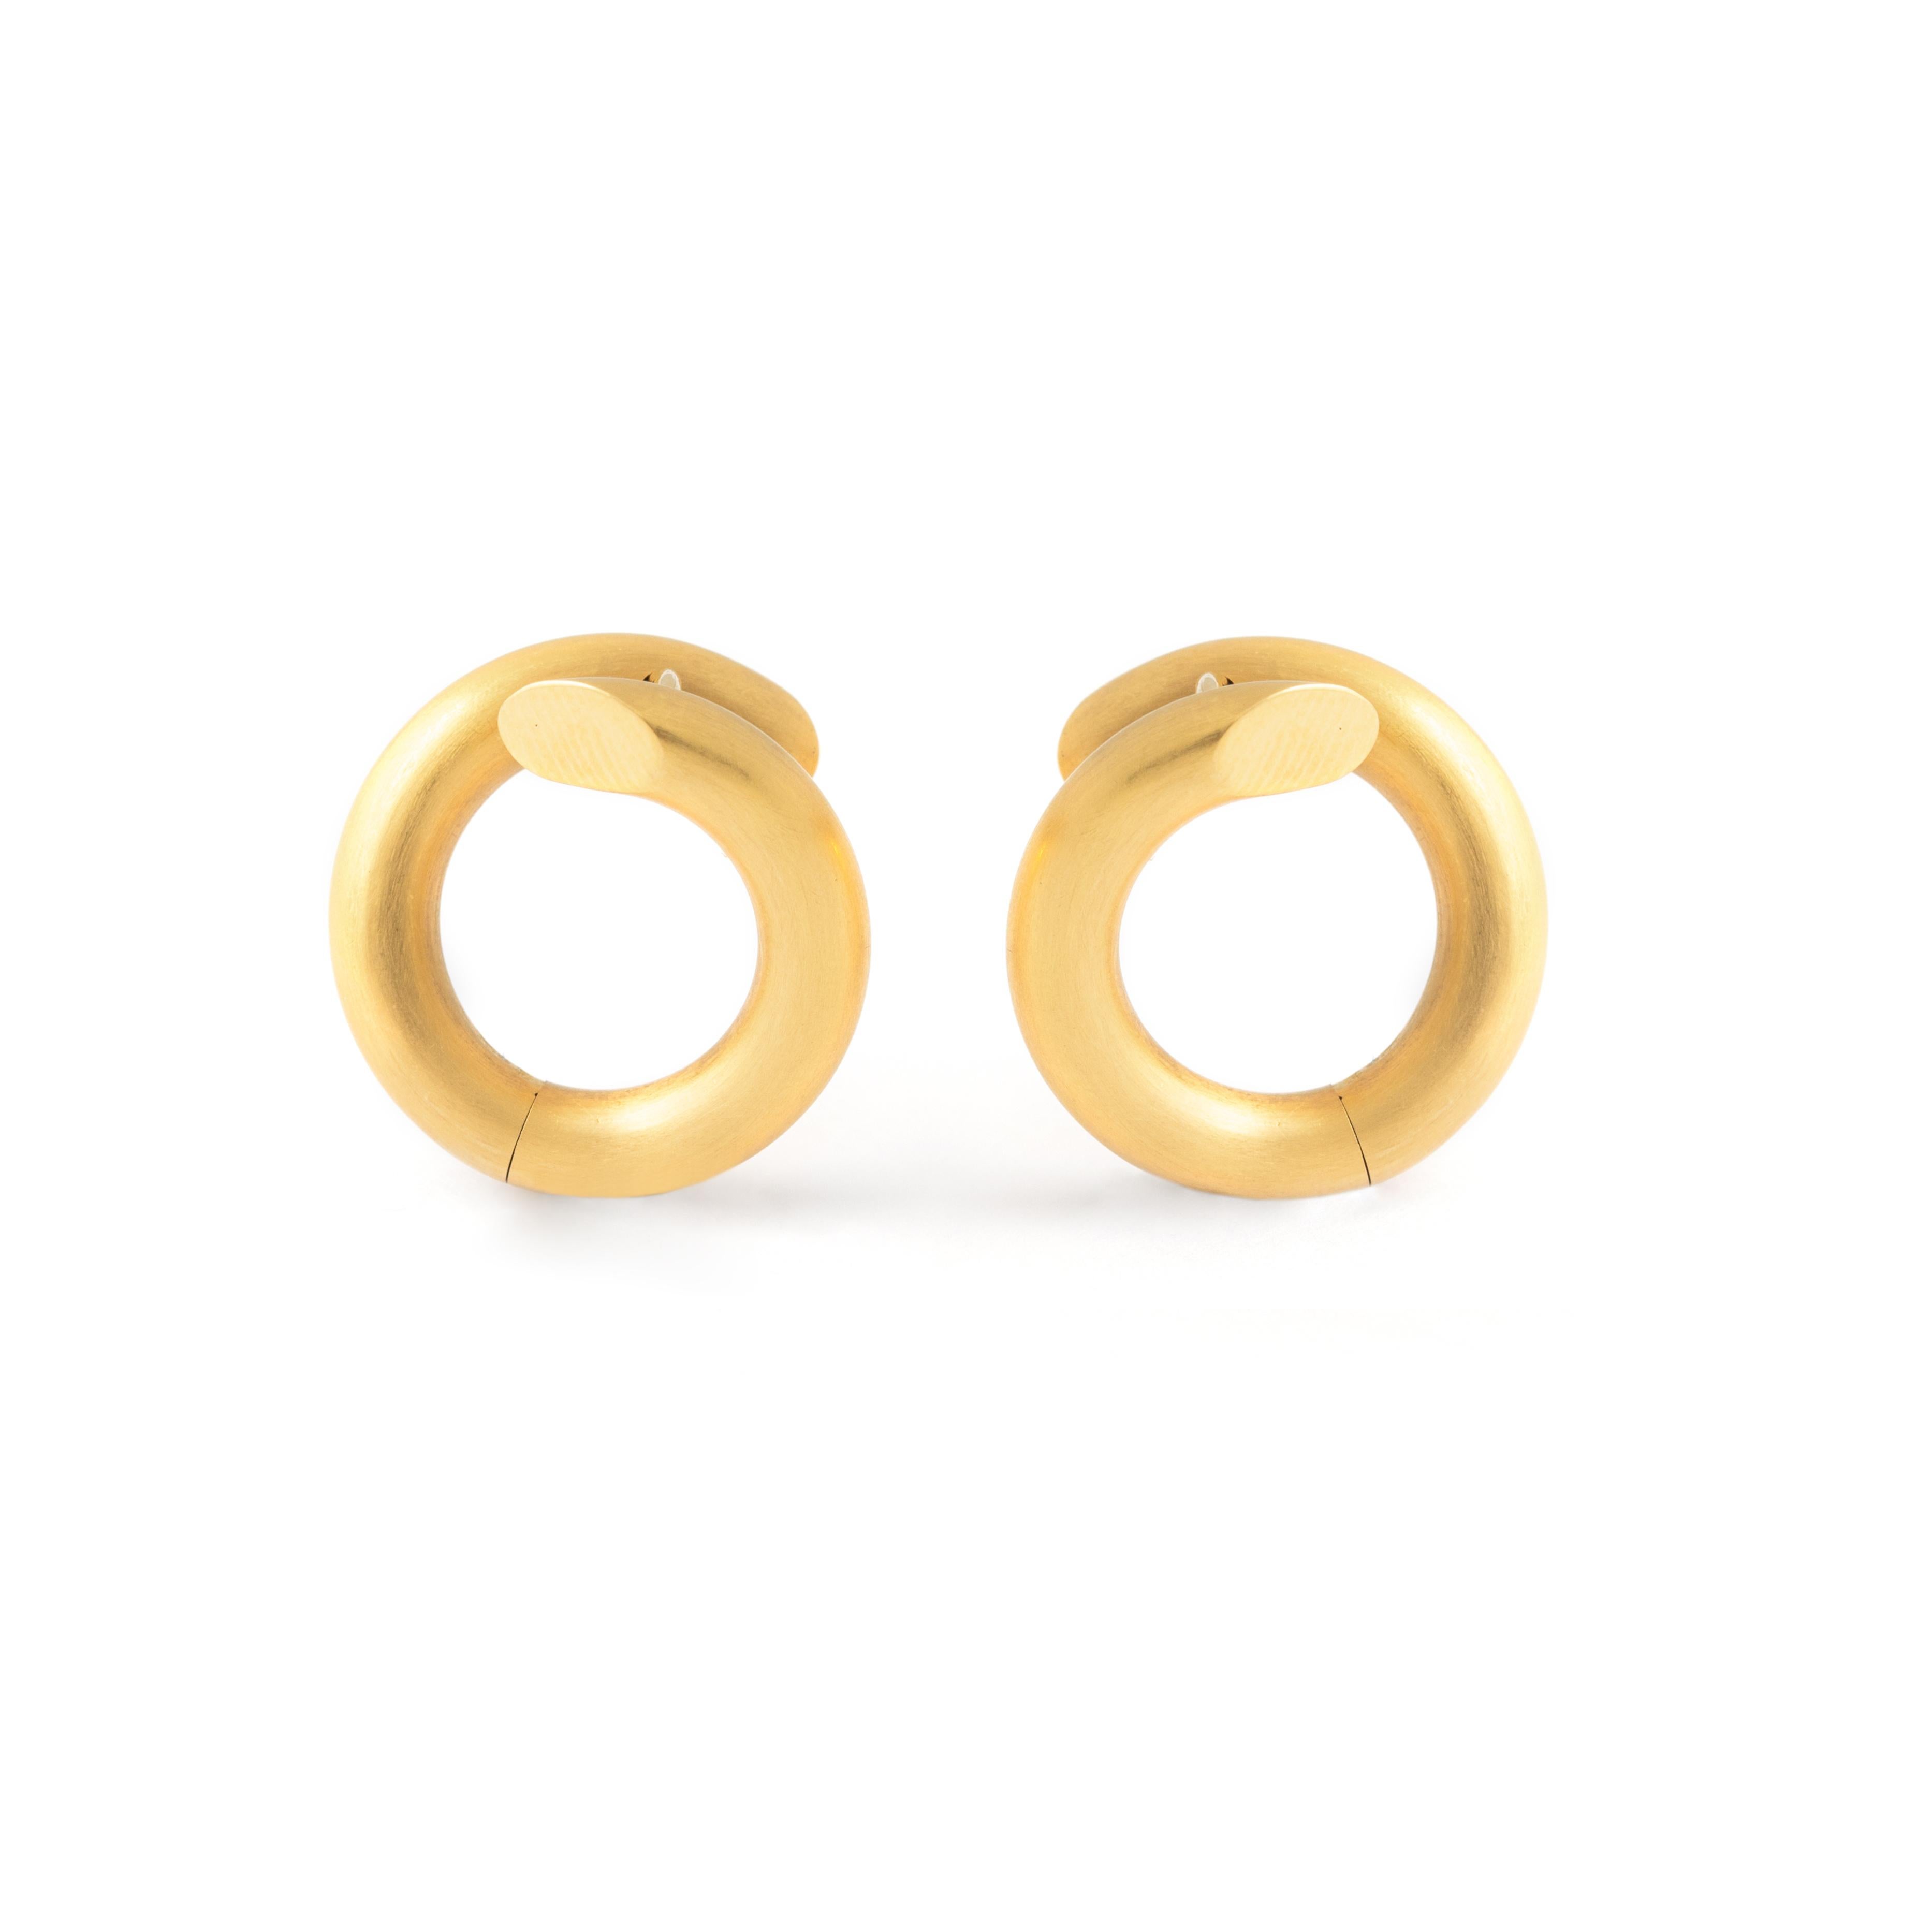 Round Cut Diamond Yellow Gold 18K Earrings For Sale